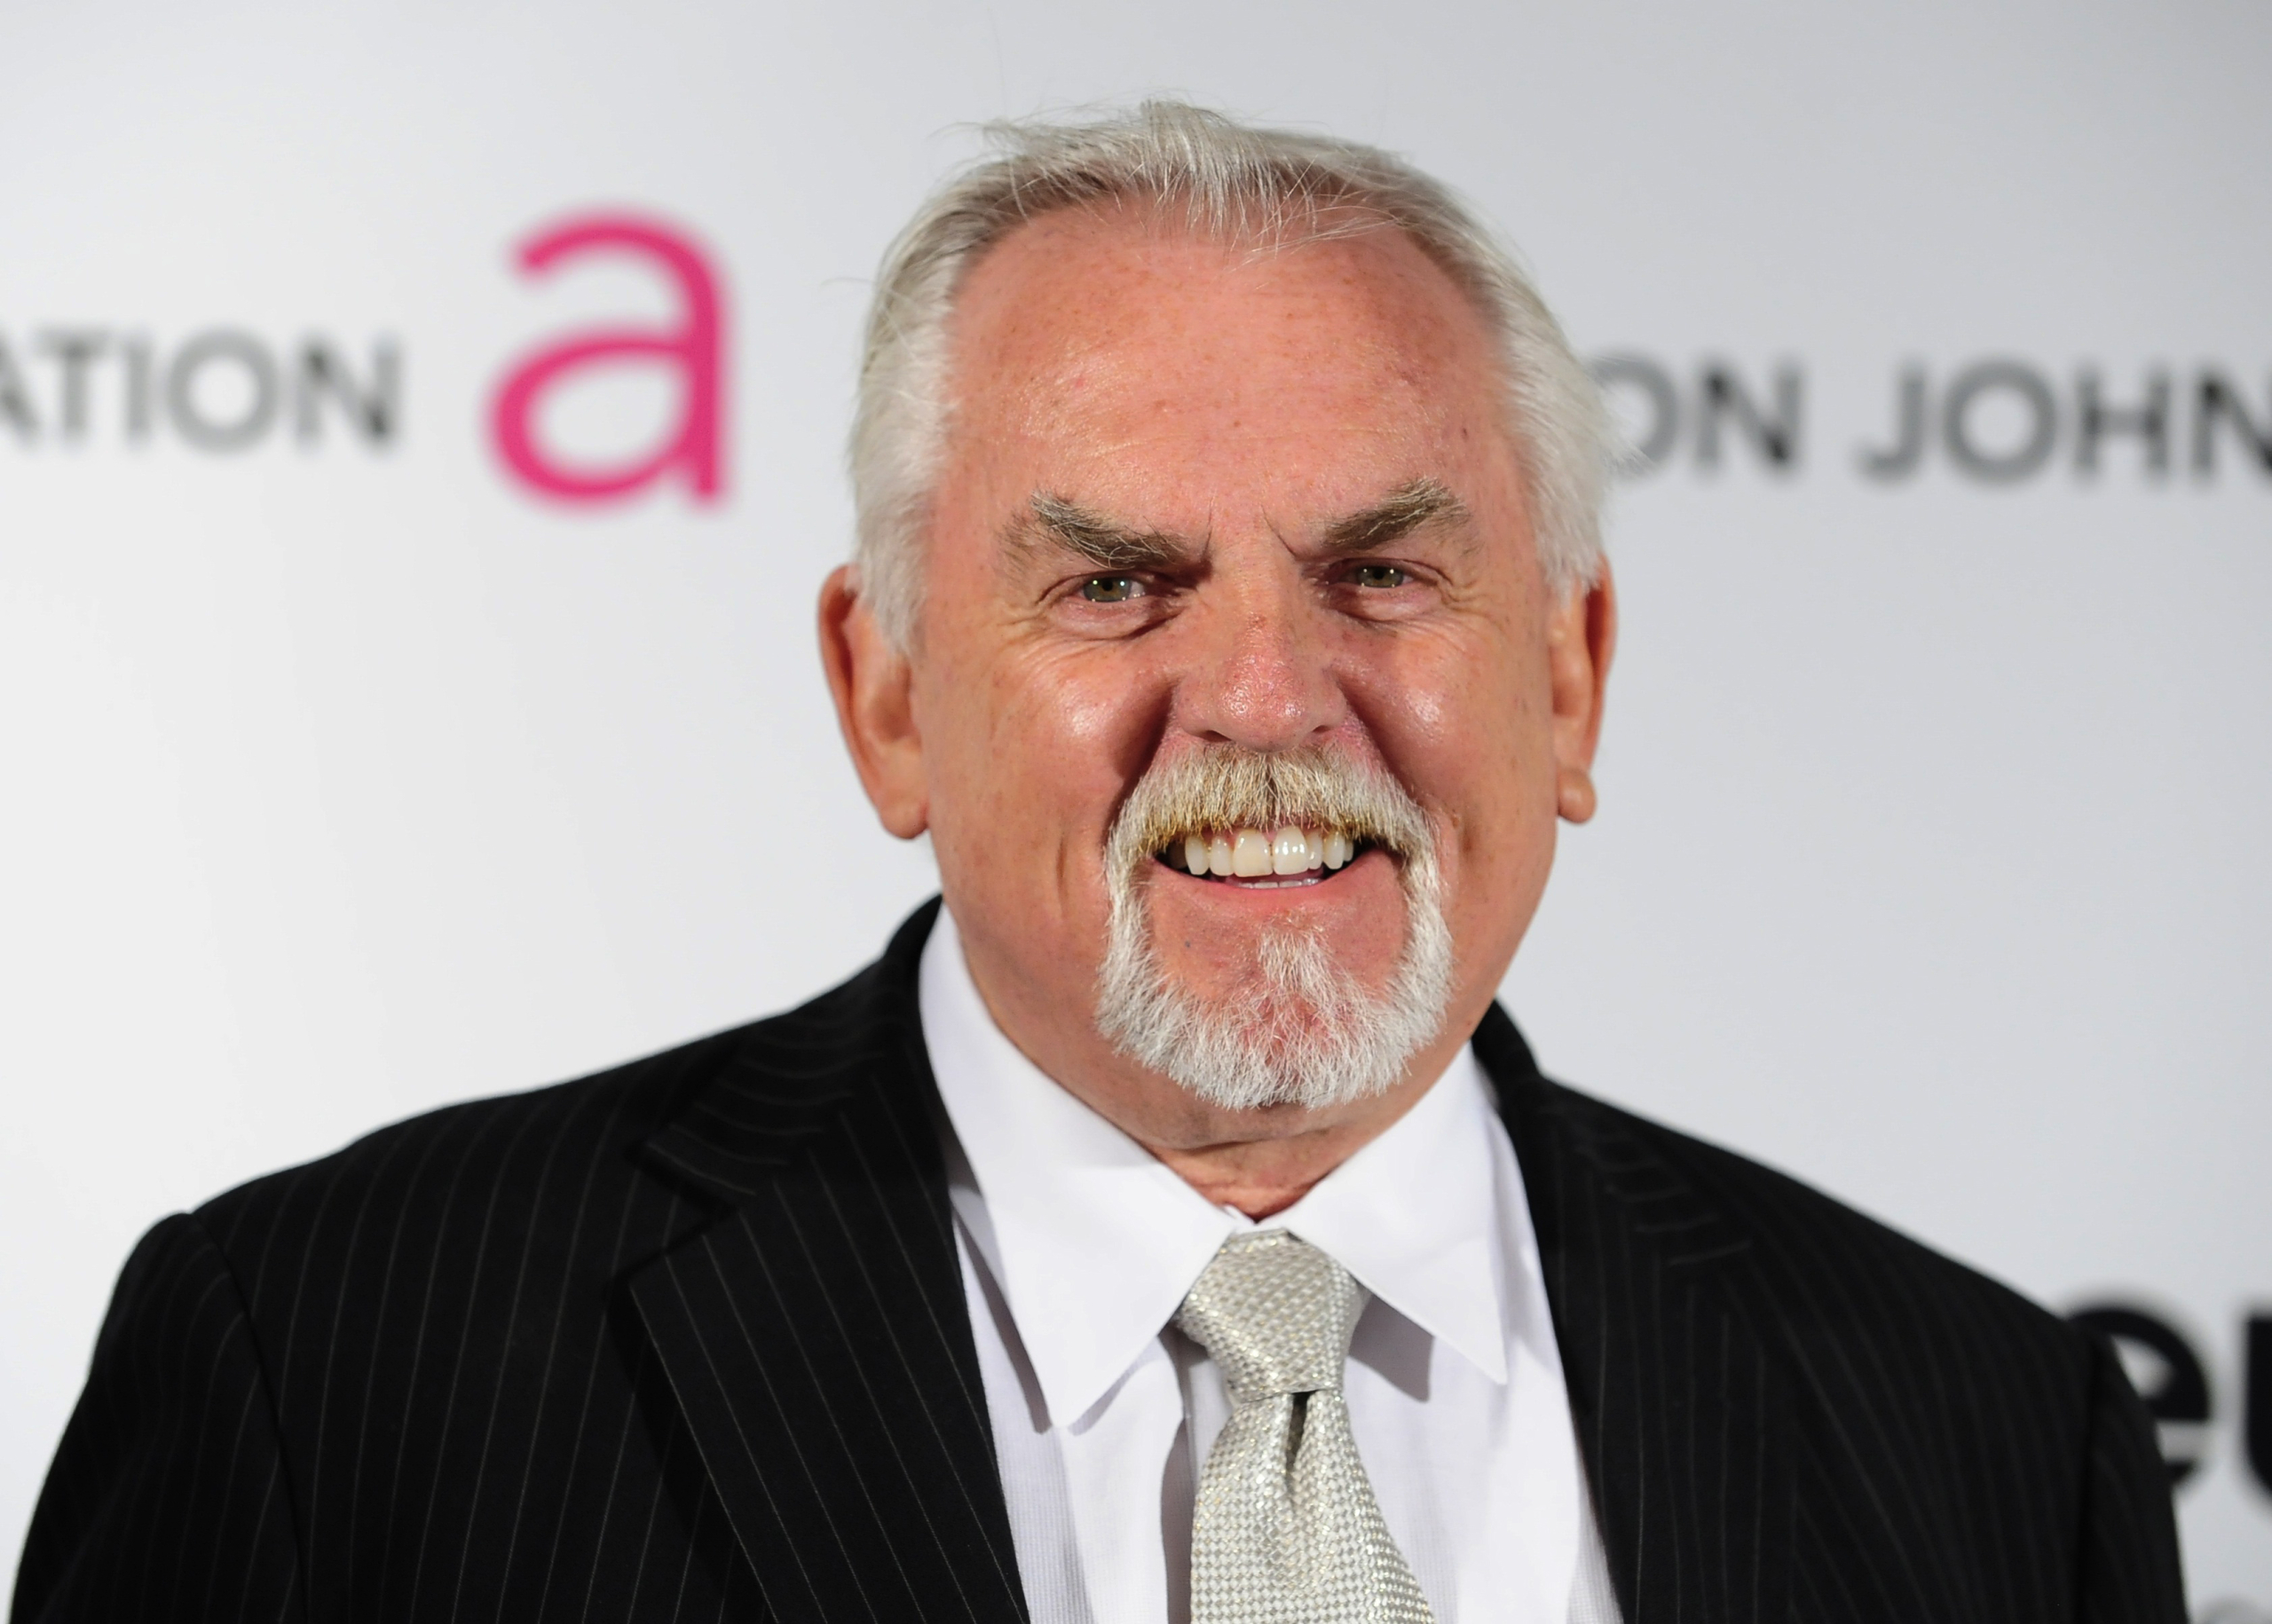 PODCAST – Tuesday, June 4: The CEO’s Big Birthday; Dead Woman Wakes Up In Funeral Home; John Ratzenberger